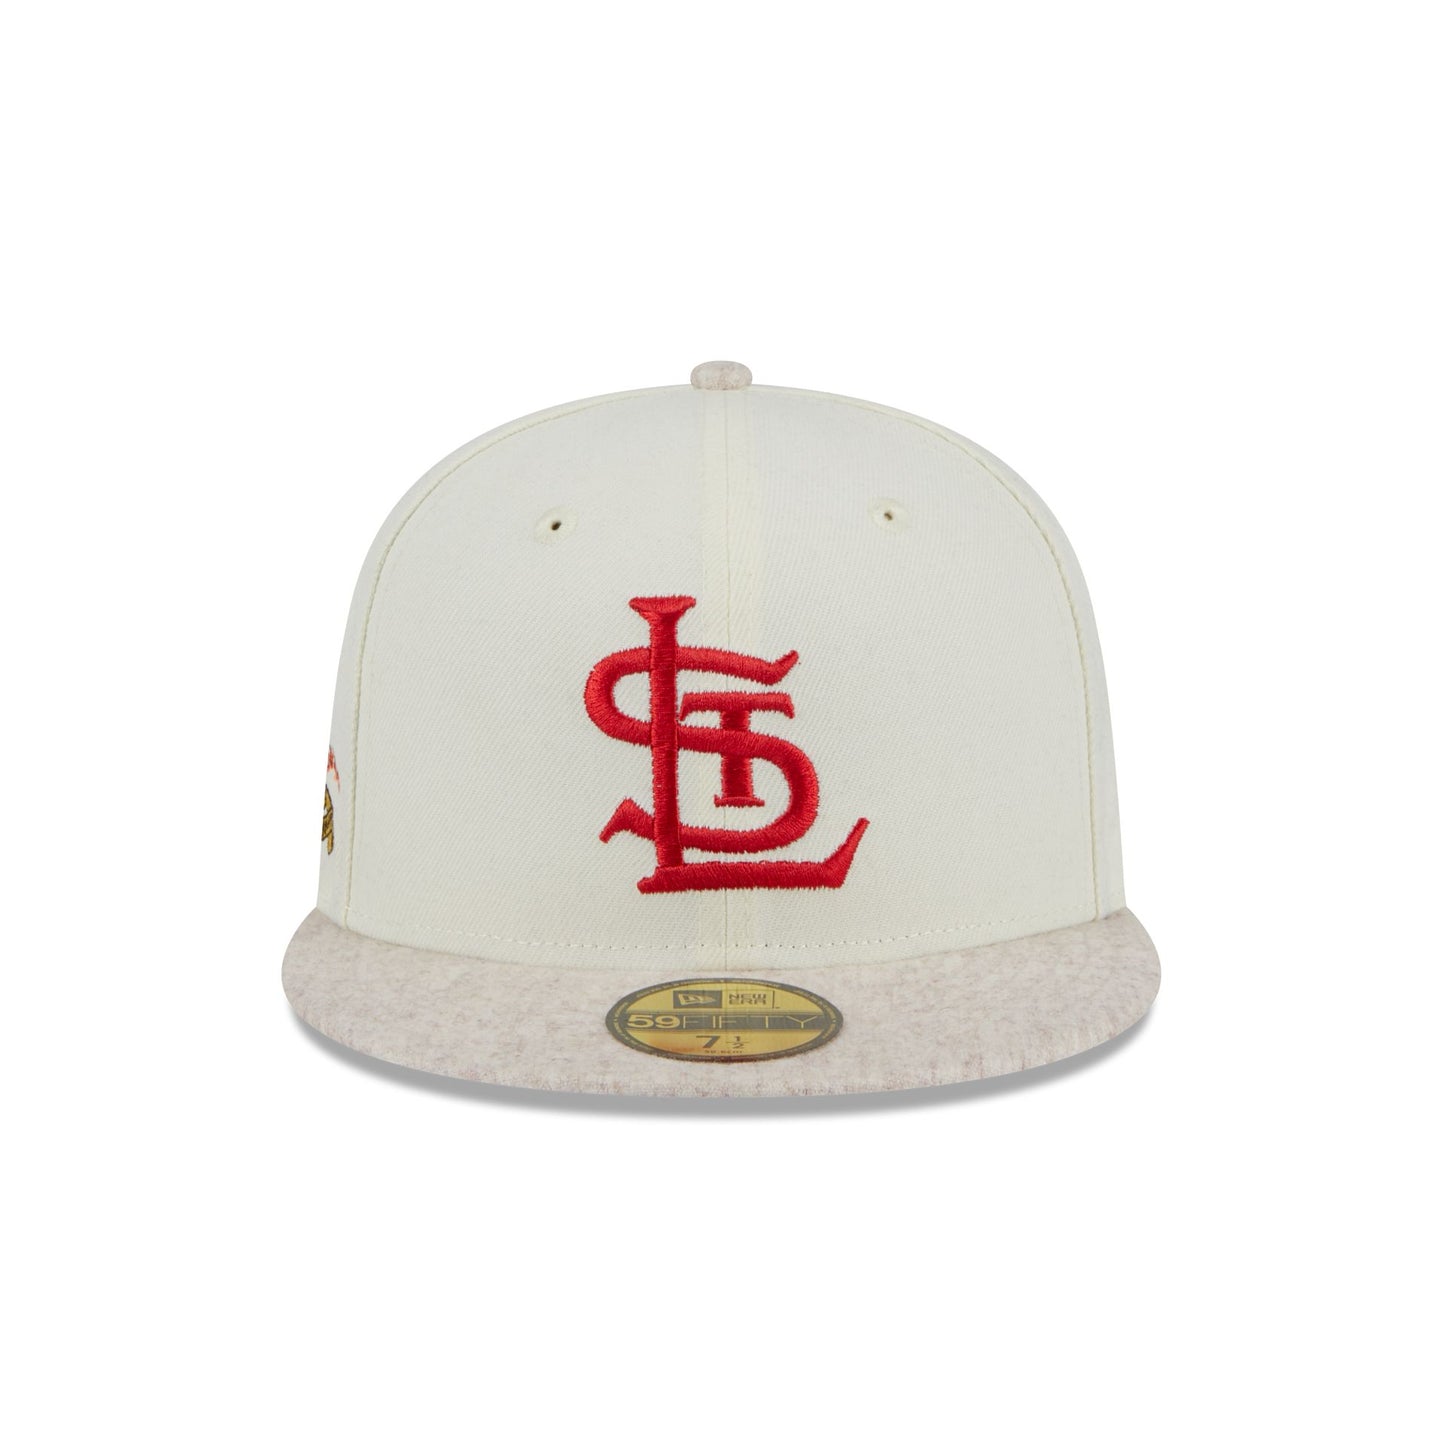 Men's St. Louis Cardinals New Era Stone/Red Retro 59FIFTY Fitted Hat